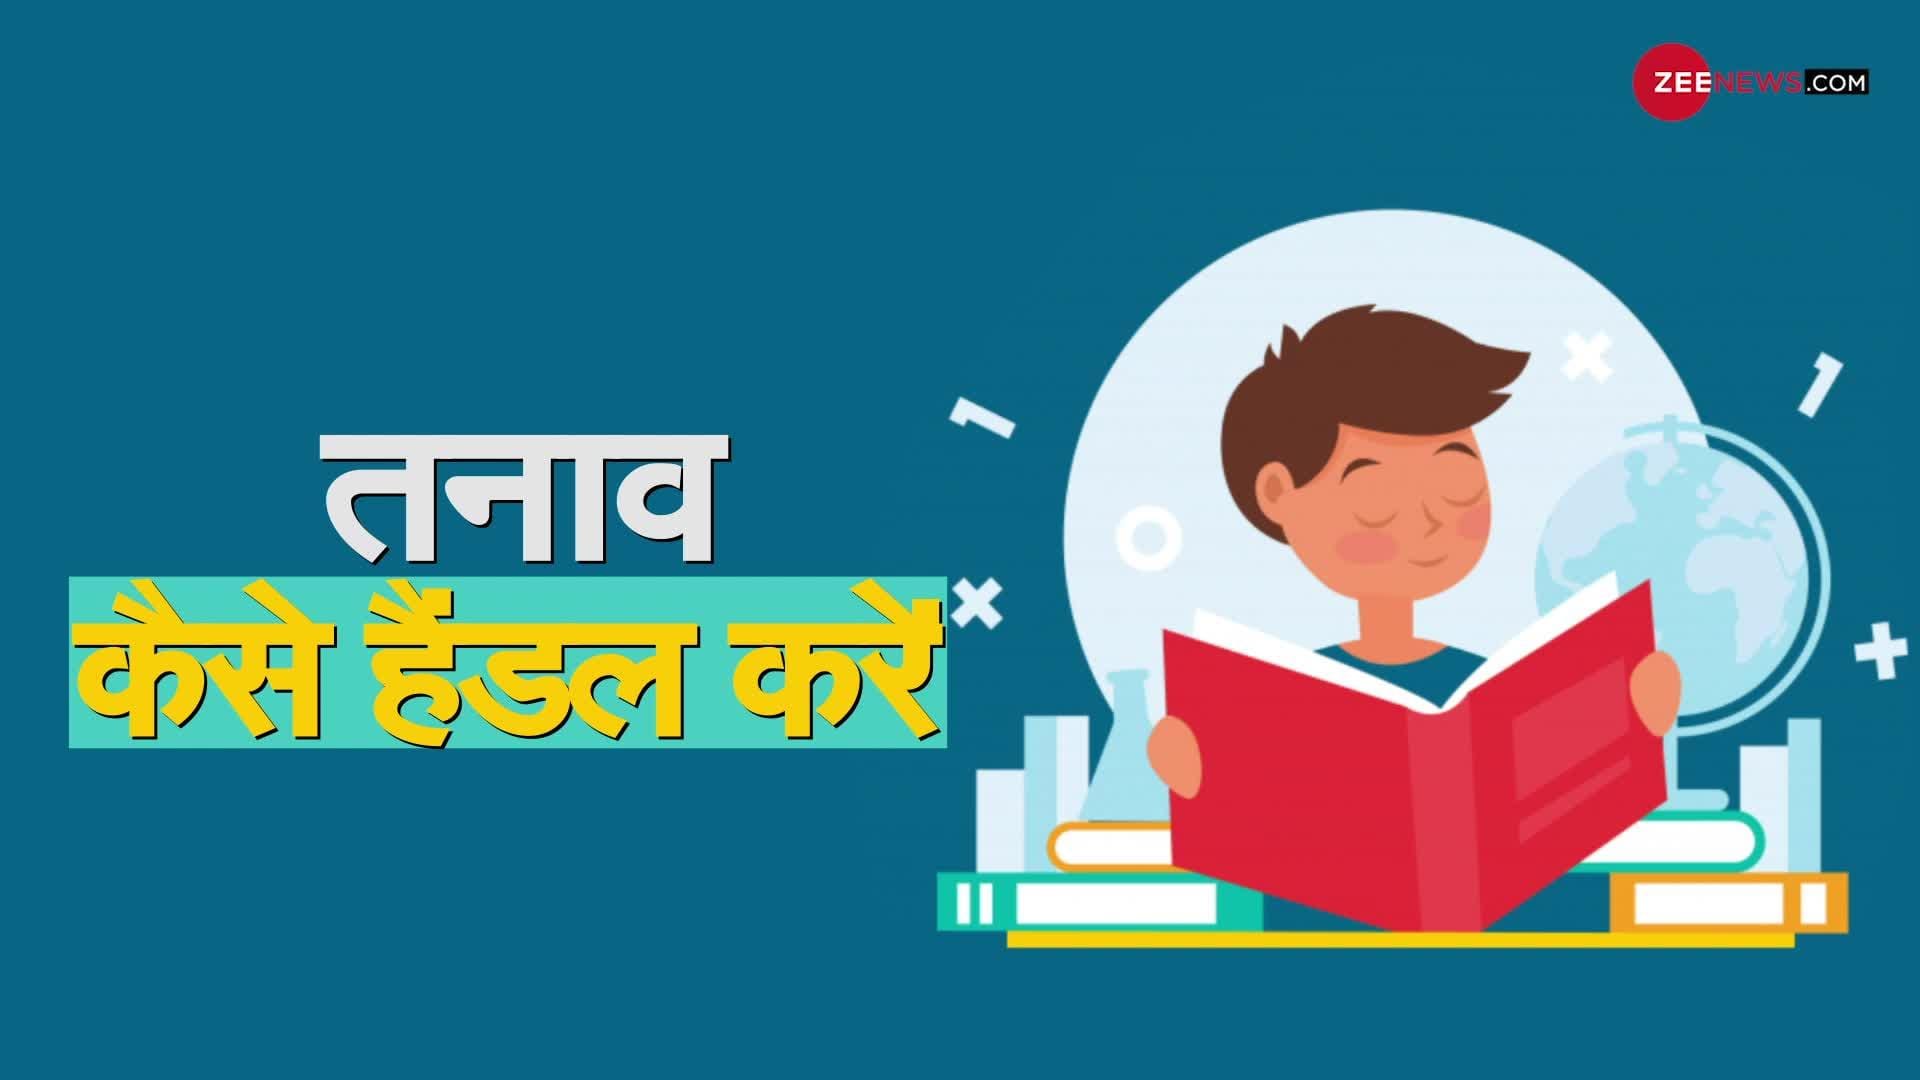 5 tips to prepare for Board Exam | Zee News